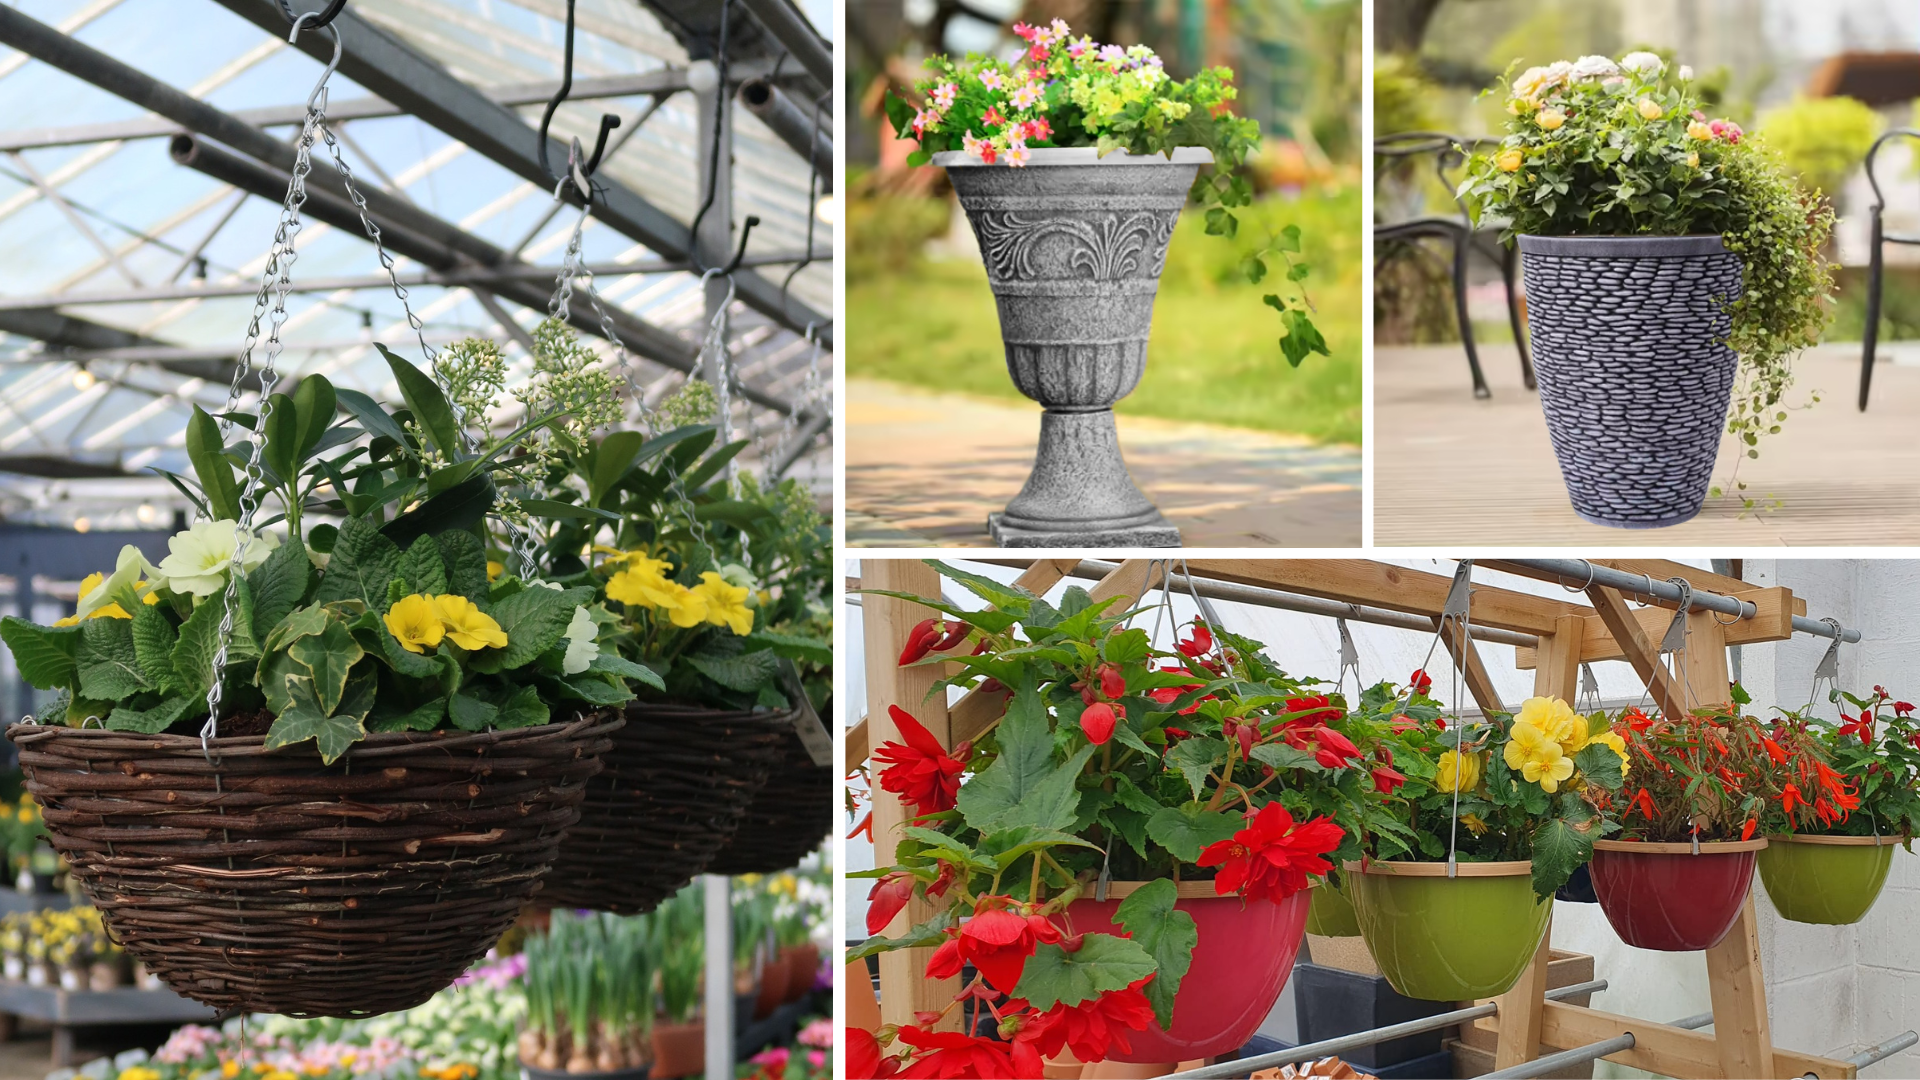 Creating Stunning Container Gardens with pots and planters.